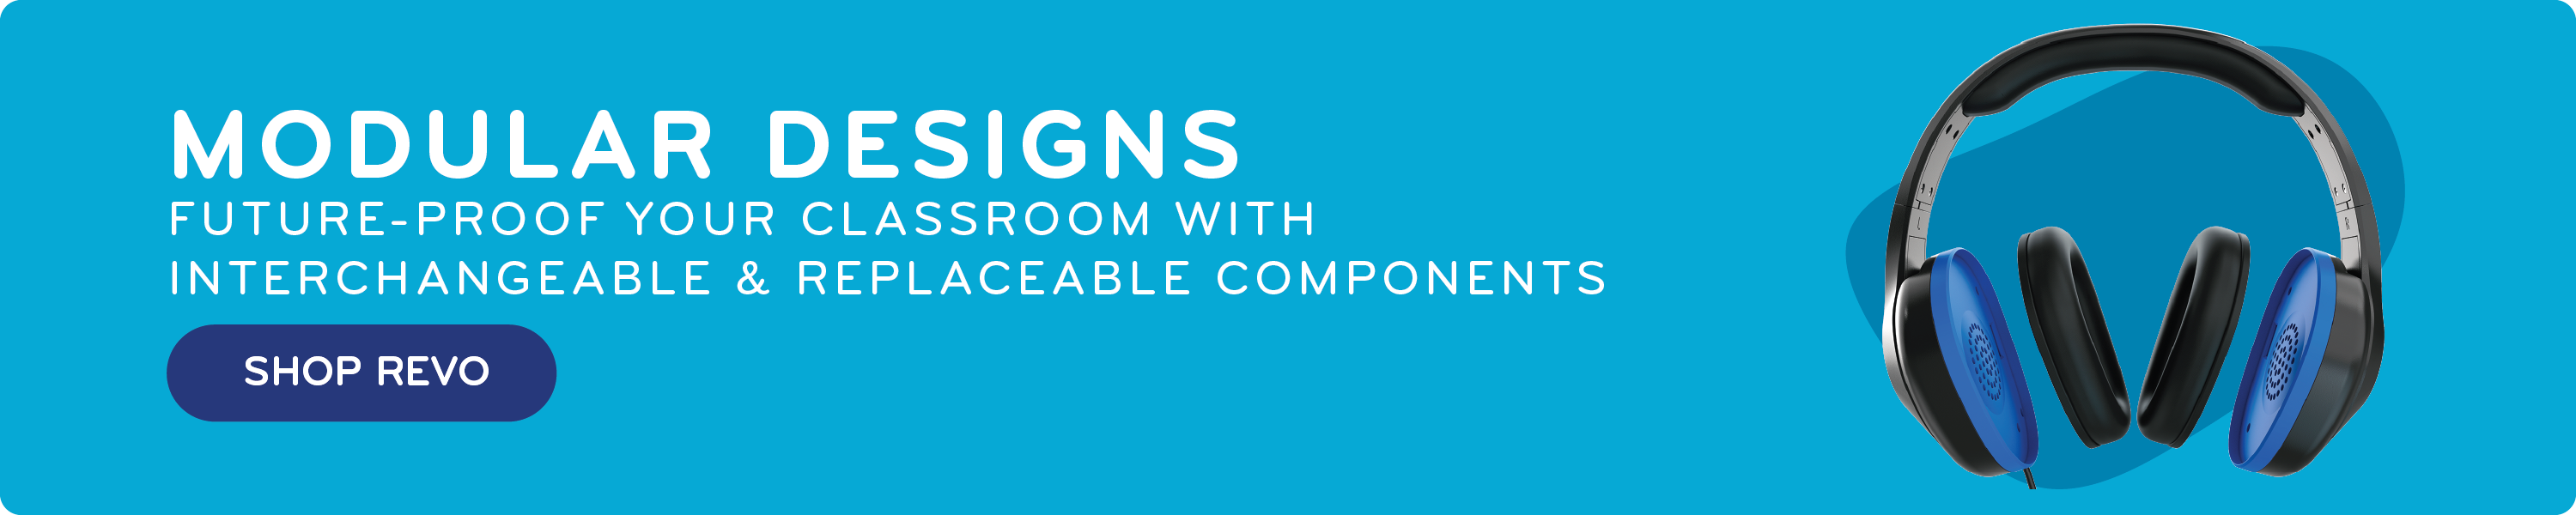 Modular Designs future-proof your classrooms with interchangeable and replaceable components